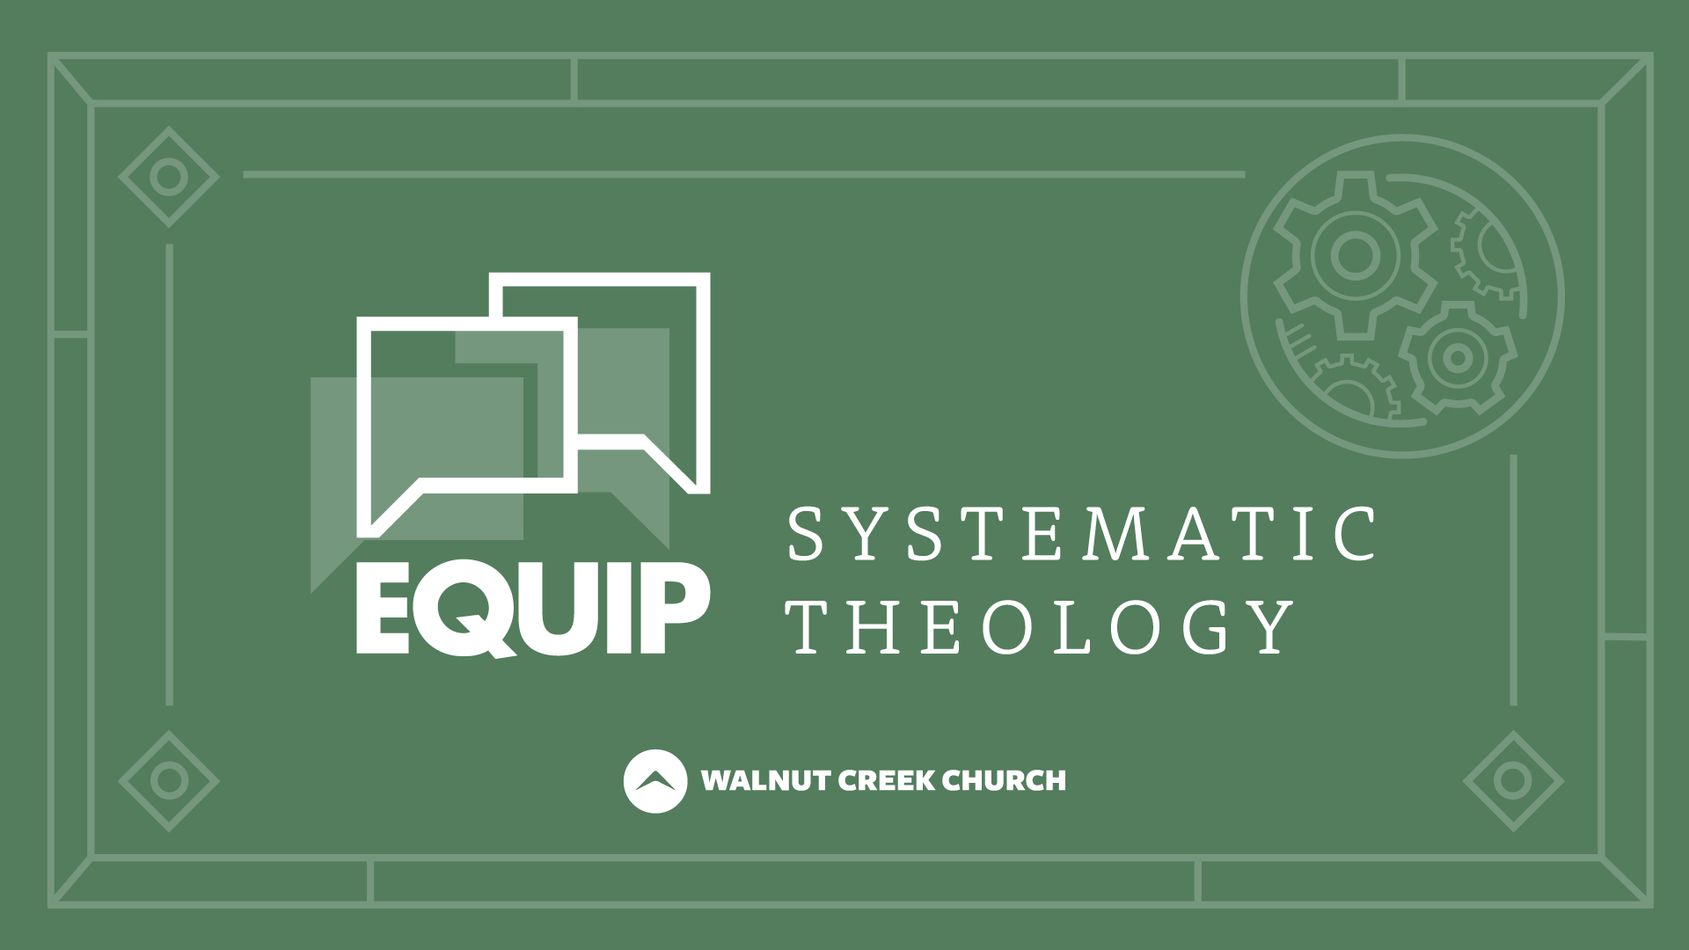 image for the Systematic Theology card